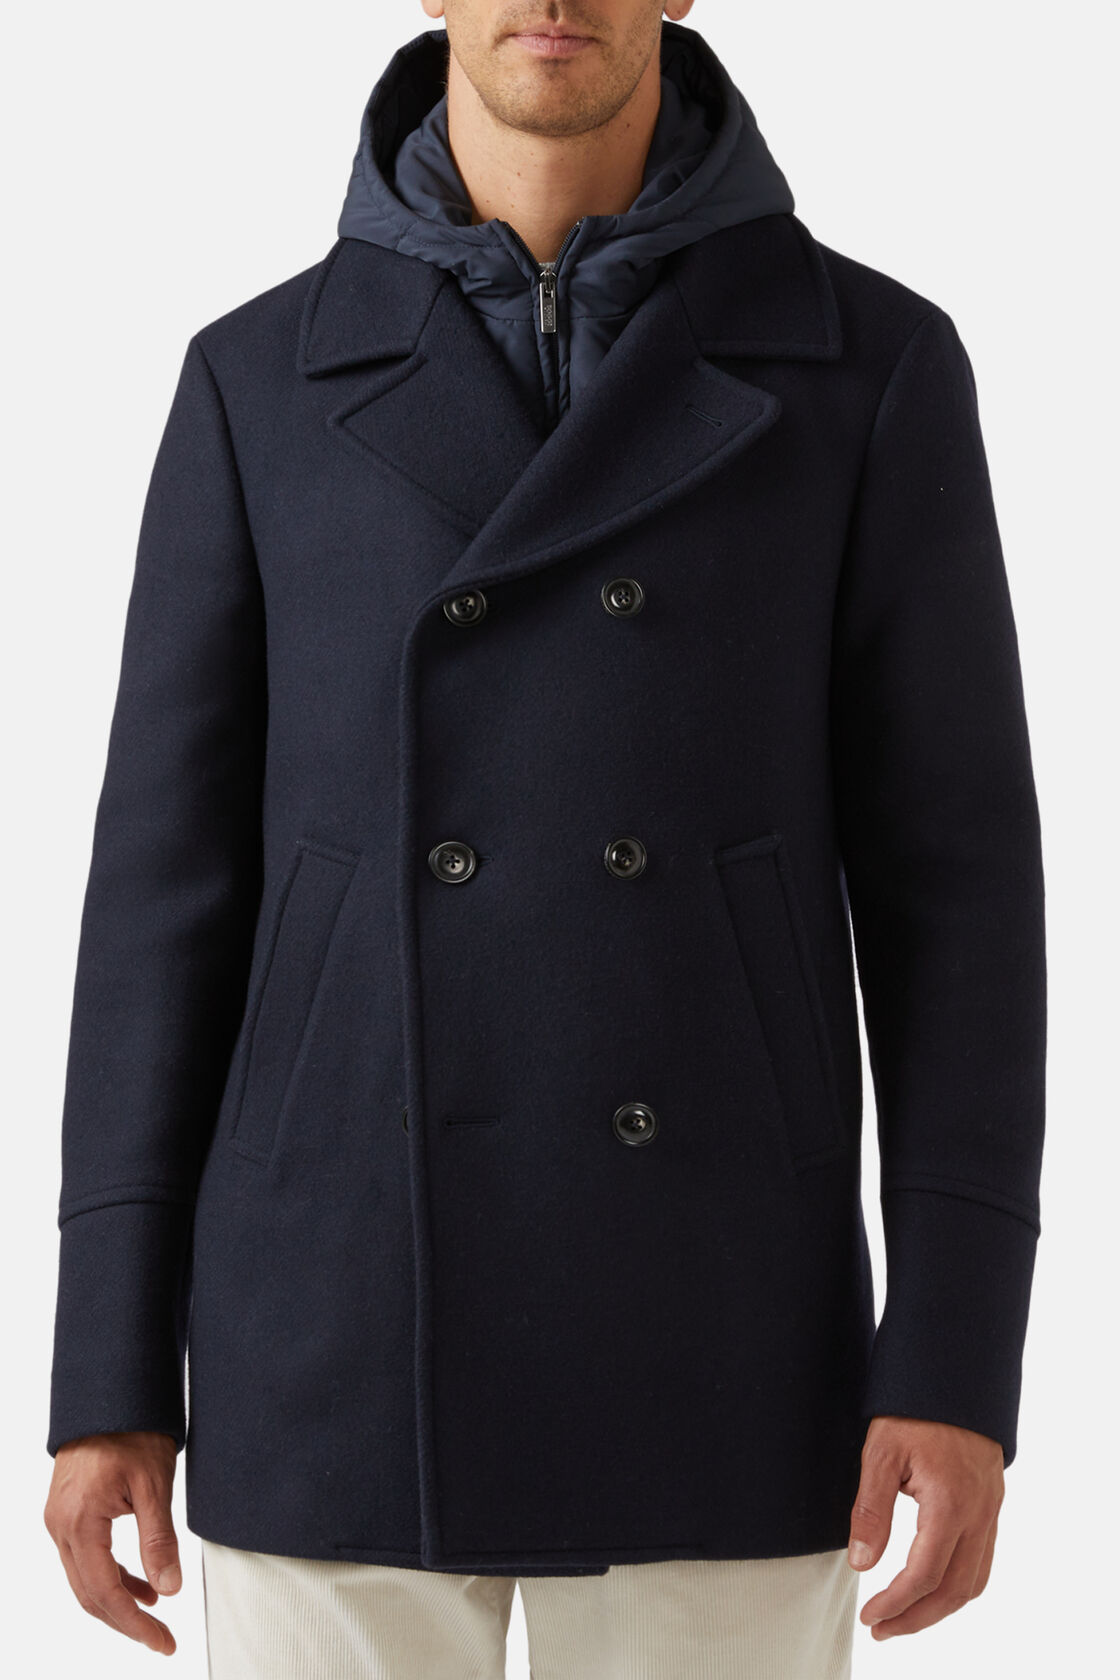 Wool Peacoat With Removable Hood, Navy blue, hi-res